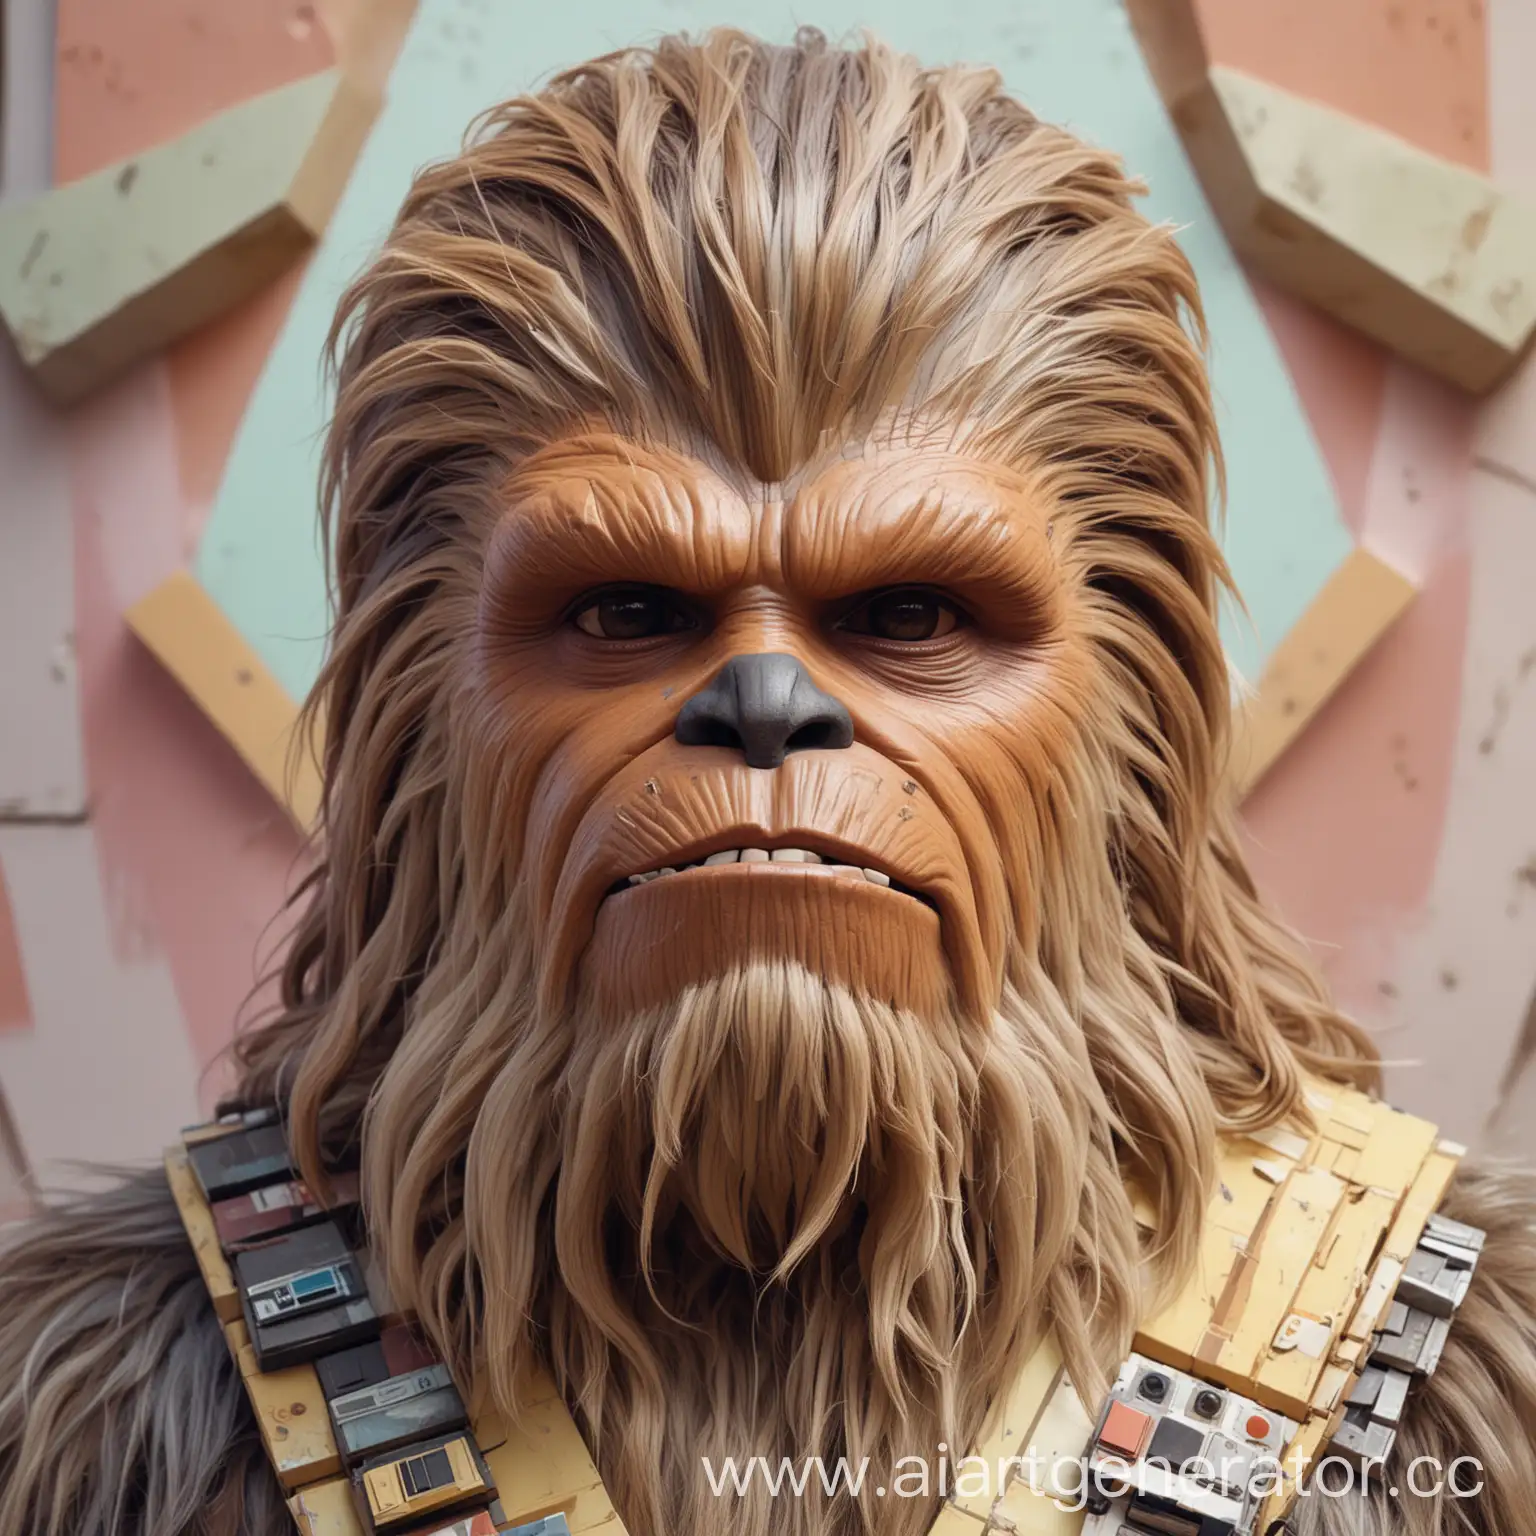 CloseUp-Portrait-of-Wookiee-Character-in-Pastel-Geometric-Style